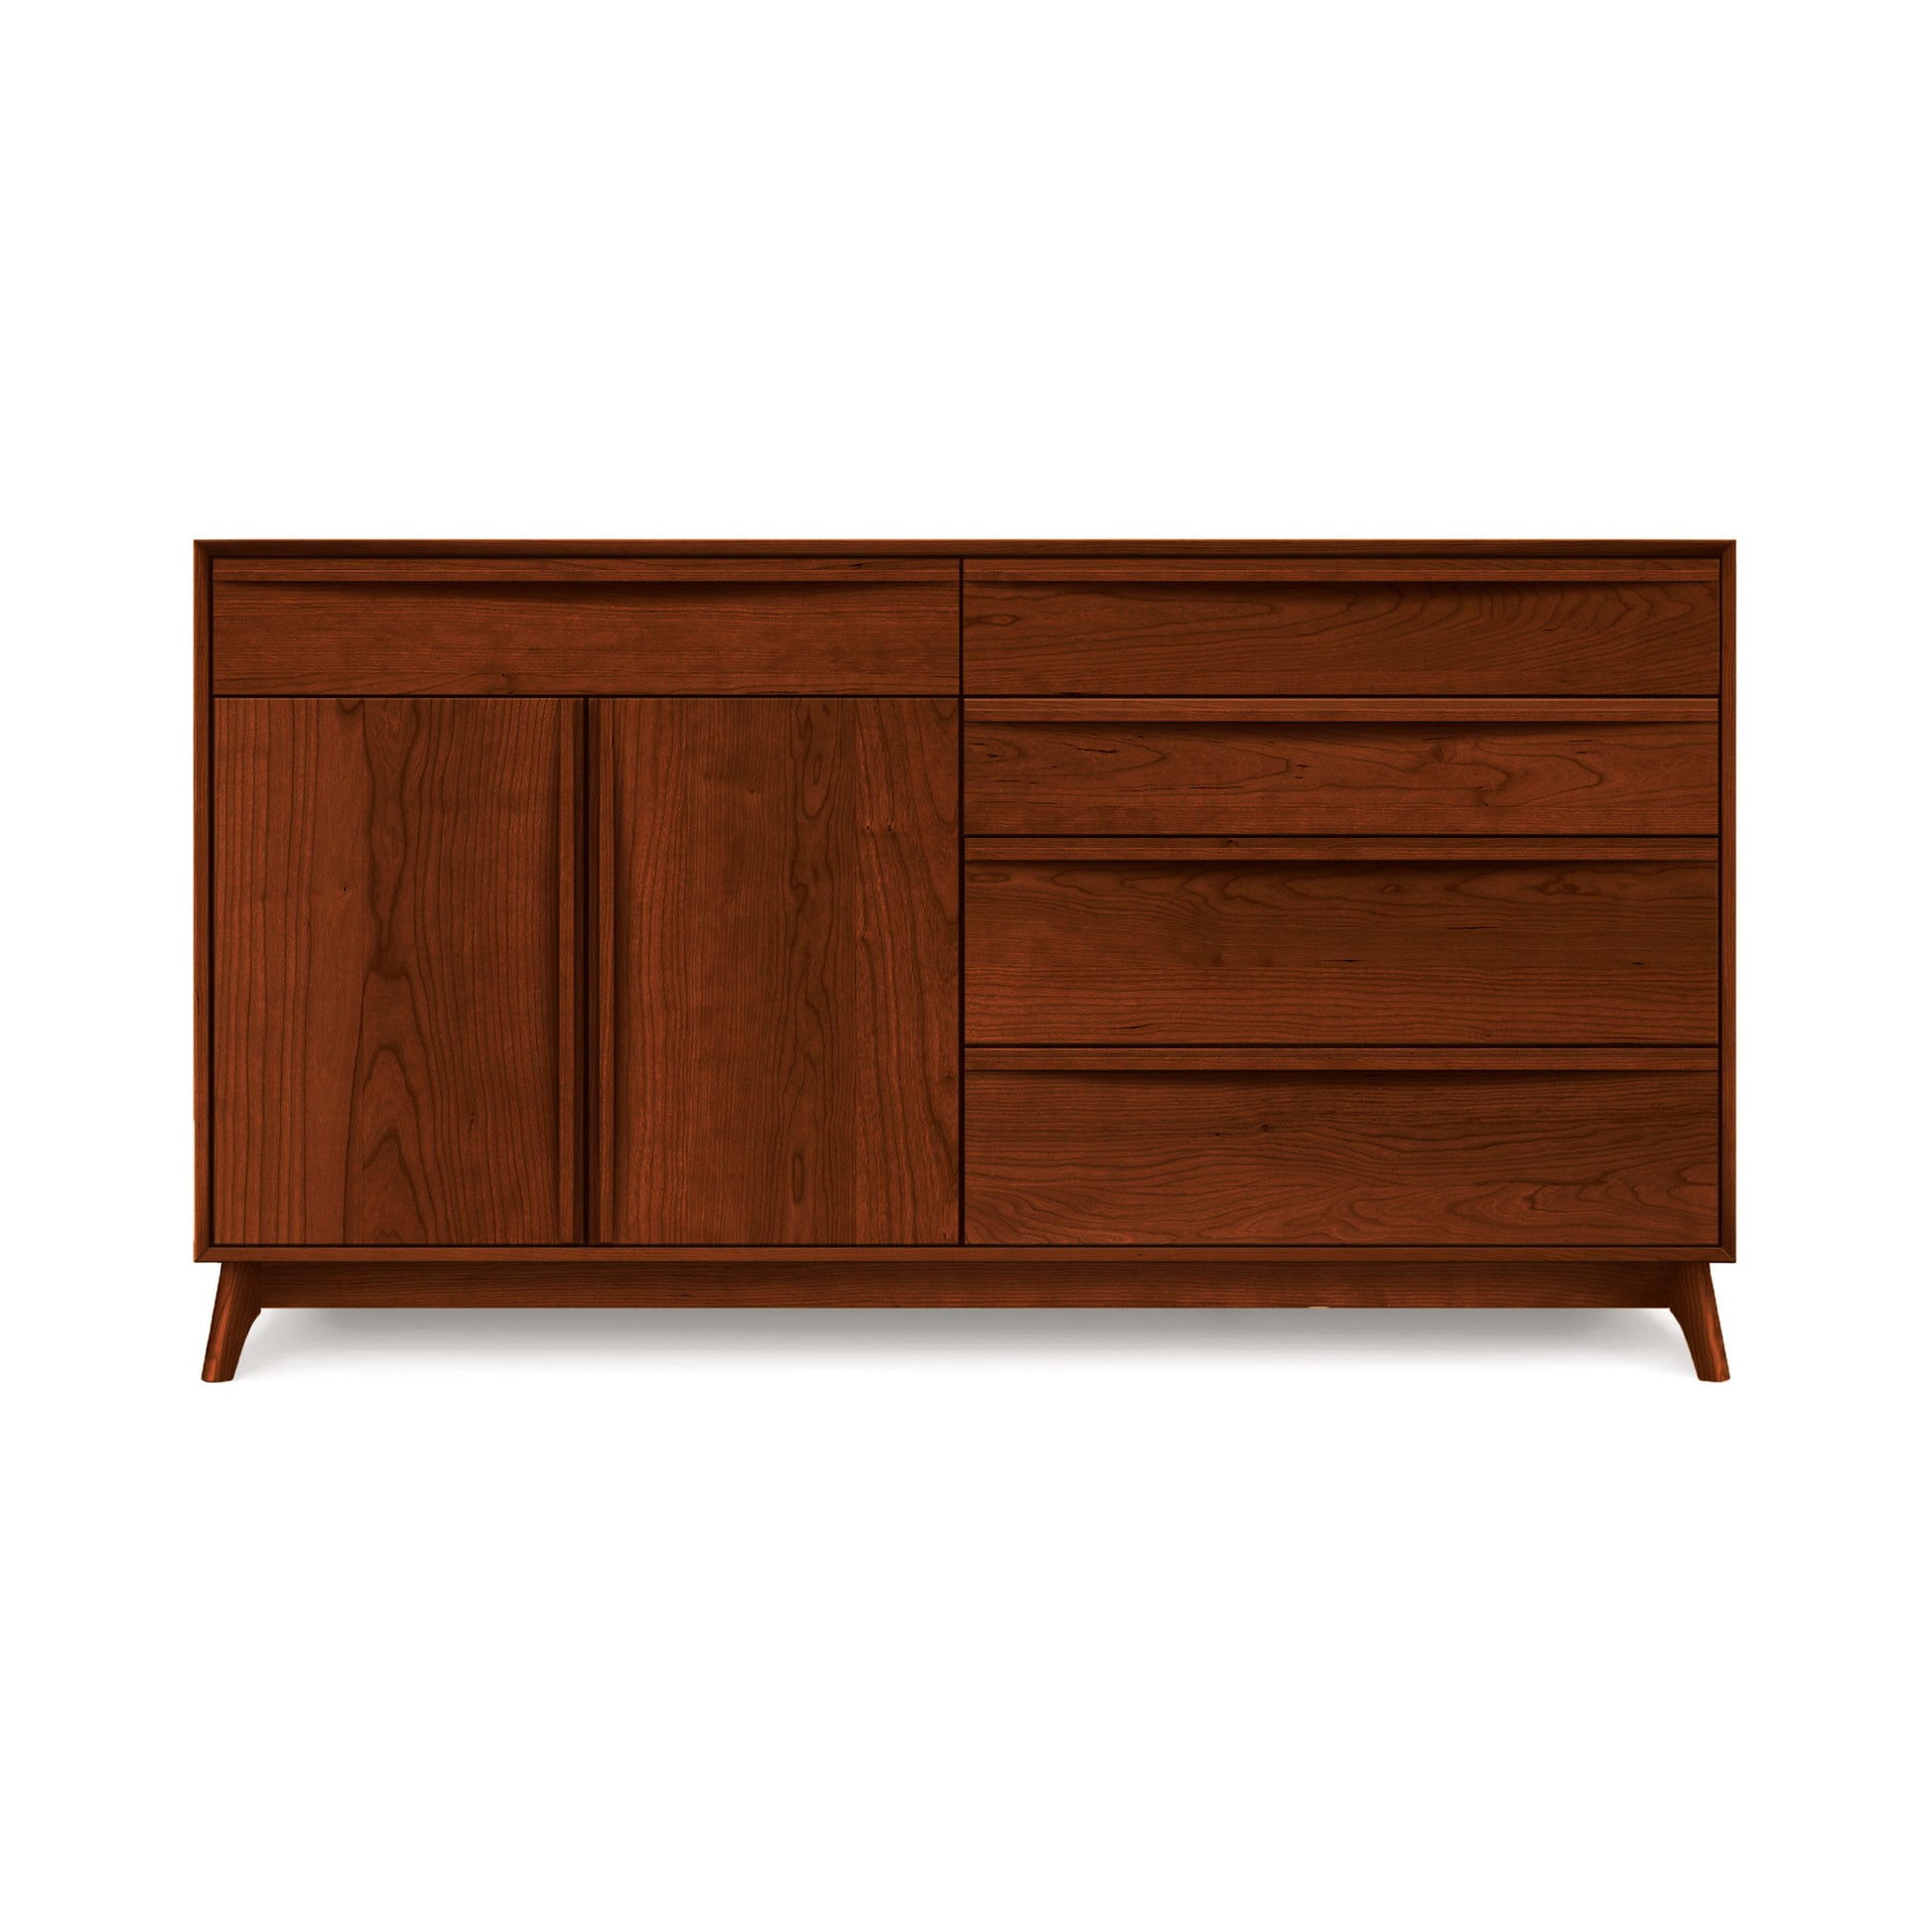 A Copeland Furniture Catalina 5-Drawer, 2-Door Buffet, a mid-century modern dining sideboard with closed doors and drawers on angled legs, isolated on a white background.